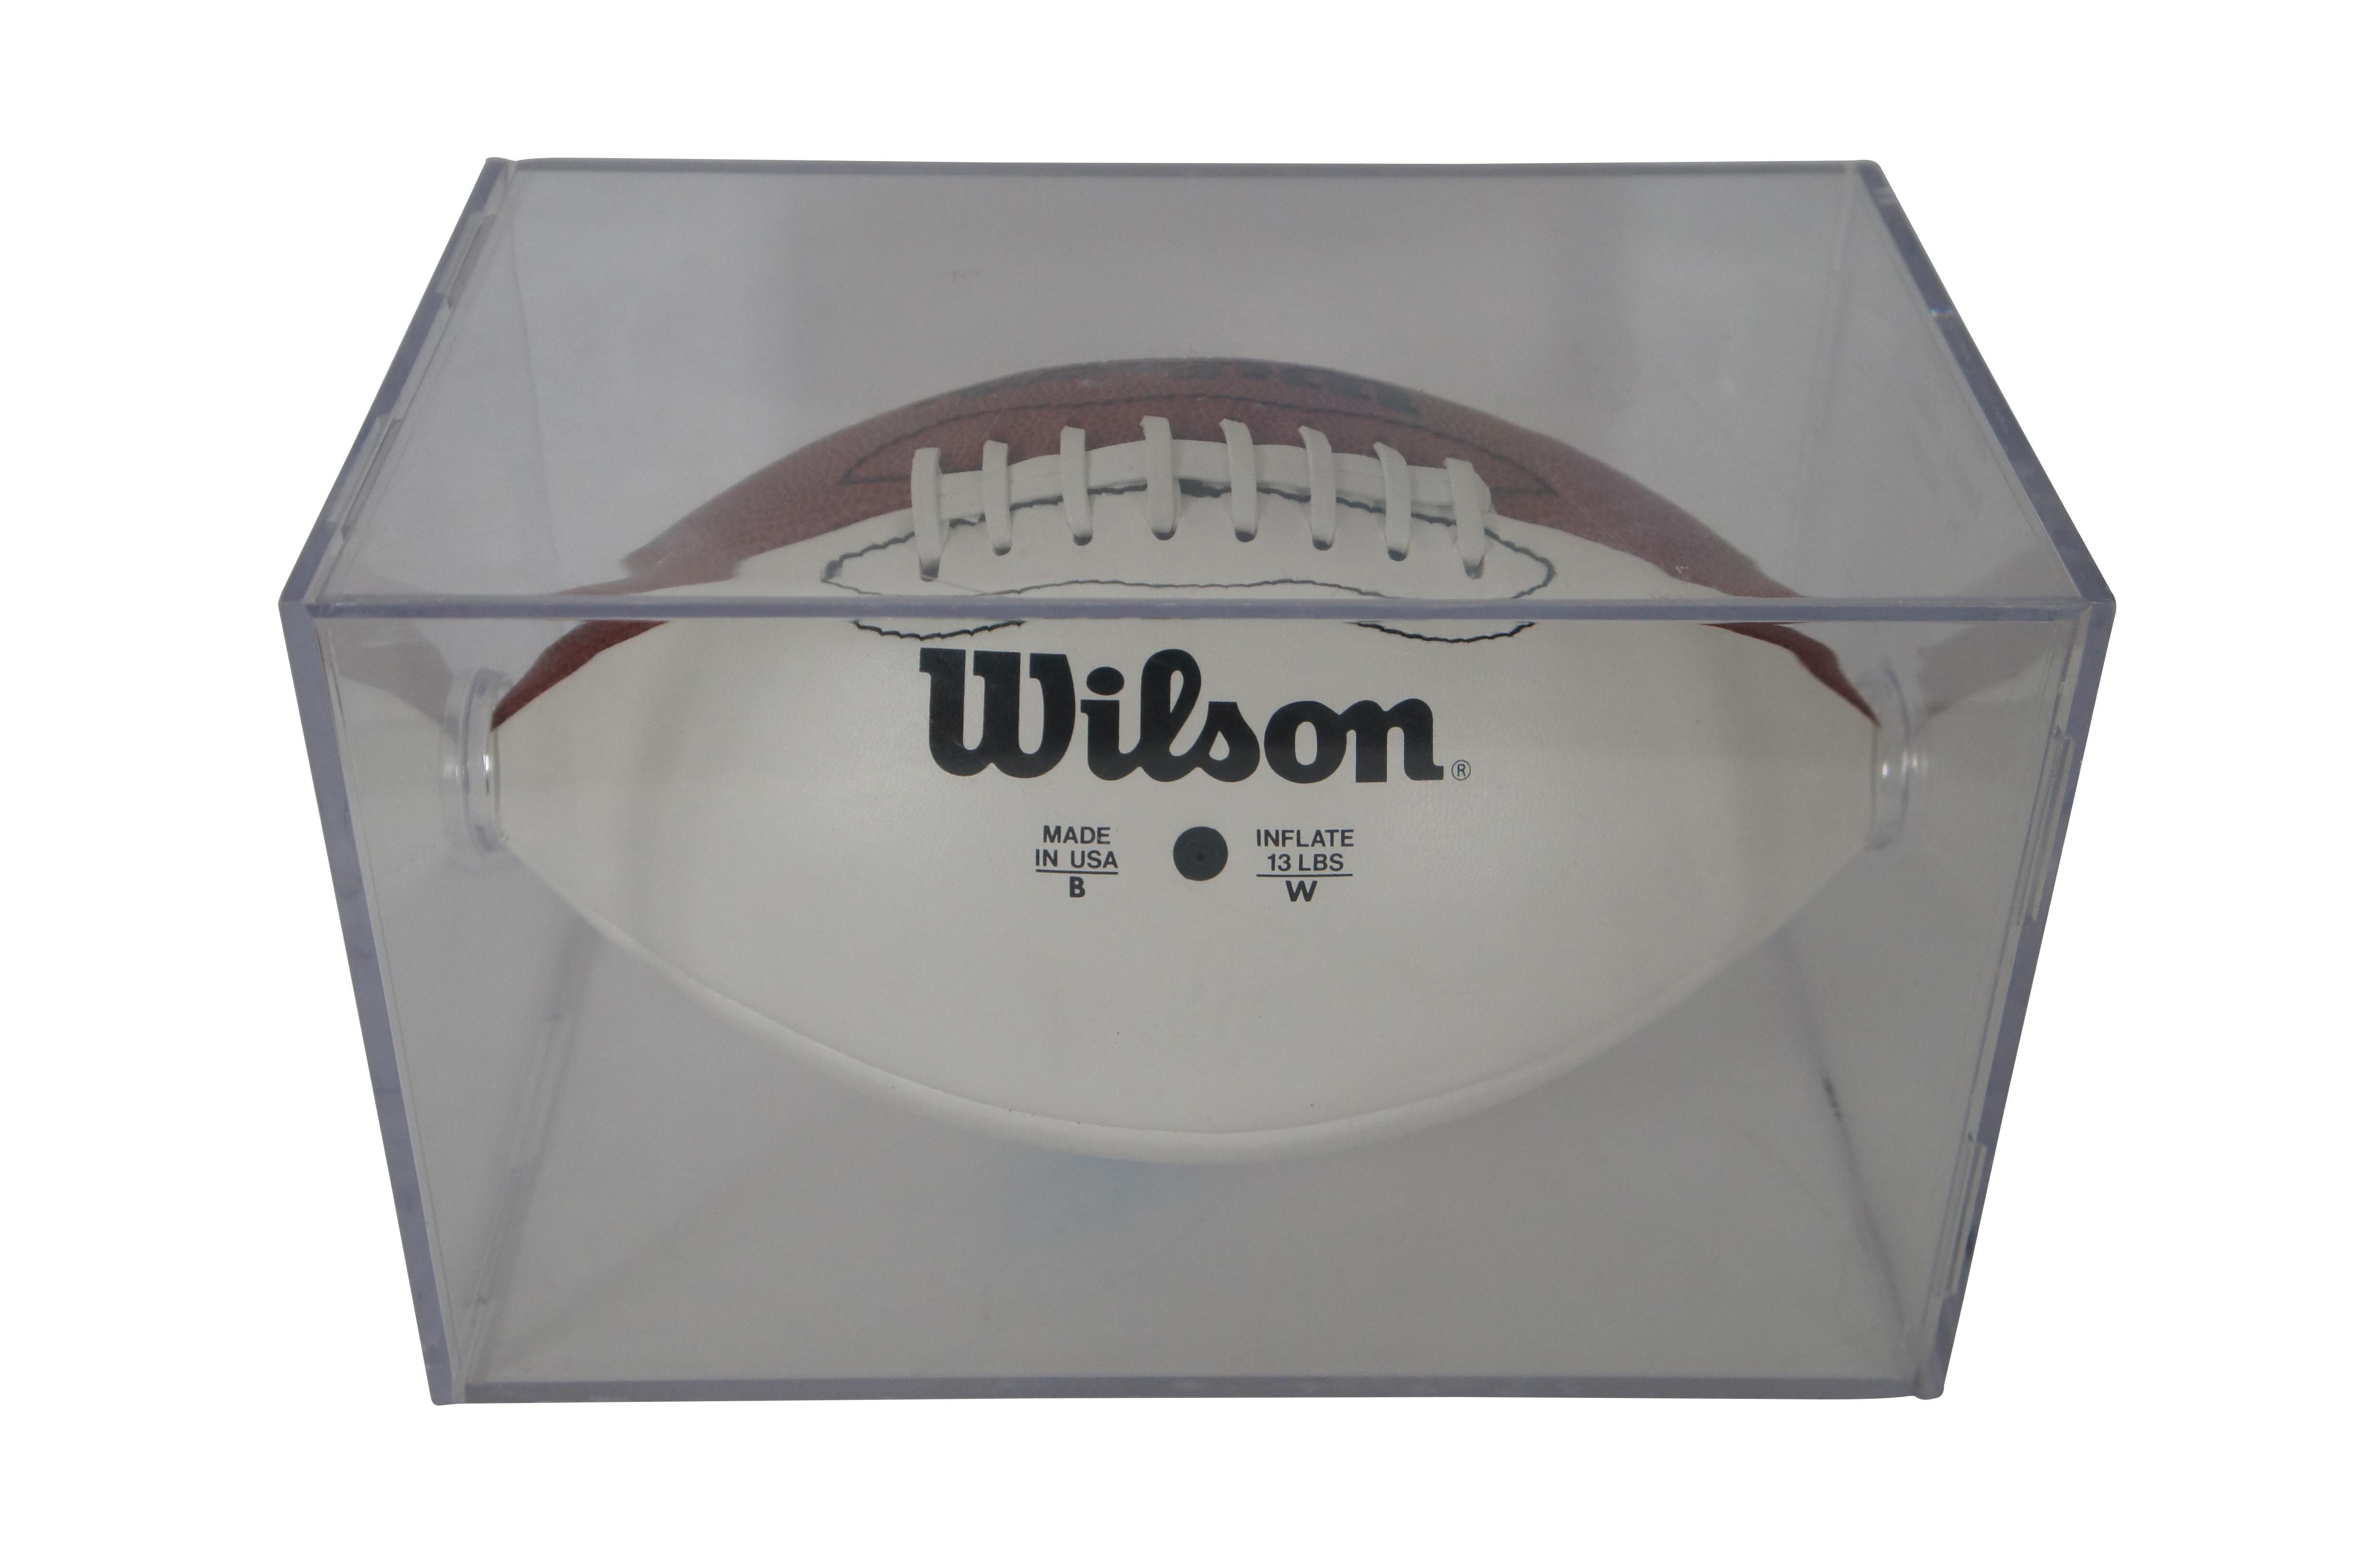 American Classical Vintage Wilson Official Leather NFL Football & Acrylic Trophy Display Case 12